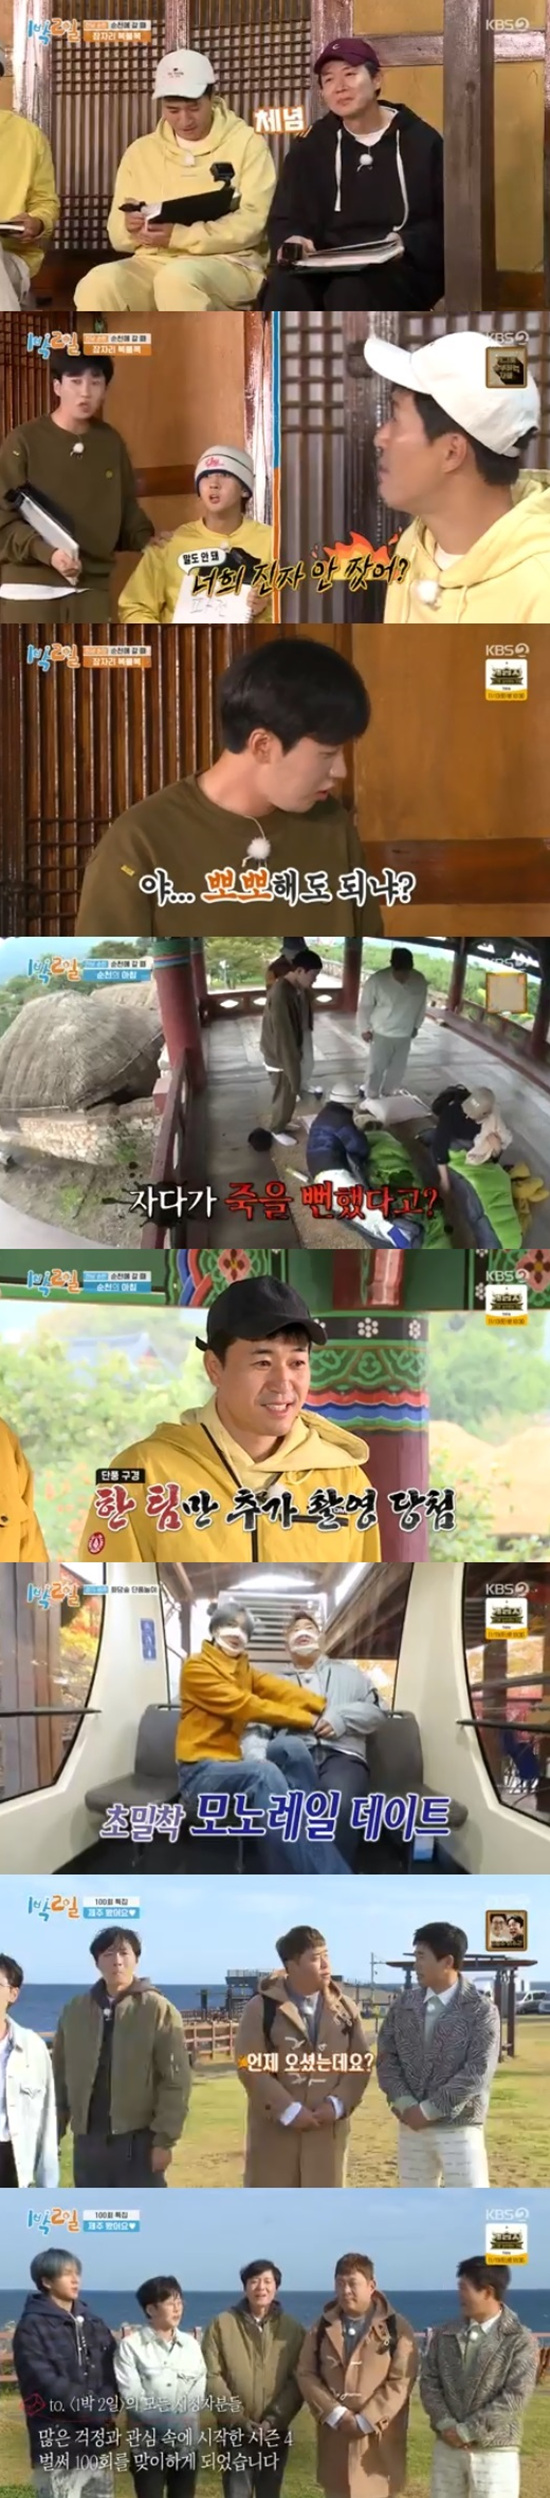 On KBS 2TV Season 4 for 1 Night 2 Days broadcast on the 7th, Yeon Jung-hoon, Kim Jong-min, Mun Se-yun, DinDin and Ravi finished the Suncheon Travel and headed for Jeju Island.The members were divided into three teams, two for the night, and went to the Bokbulbok Show. The game to be decided was the telepathic first game.The youngest, DinDin and Ravi, continued their correct answer march with a telepathic run for three straight.While the youngest was promoting, the big brothers Yeon Jung-hoon and Kim Jong-min never succeeded in the operation.In the fourth initial, The also featured DinDin and Ravi, who wrote equally parables and had a 100% success rate in telepathy; Kim Jong-min was surprised and said, Did you weave?I asked: DinDin and Ravi said, I didnt write it.DinDin and Ravi heard the fifth initial  and wrote the same as Thor, peaking at the top, confirming the indoor bedtime.DinDin surprised himself at his fantasy breathing with Ravi and laughed when he said, Can I kiss you?The big brothers Yeon Jung-hoon and Kim Jong-min, who did not work at all, came to Yaya on the south gate of Nakan-eup.The next morning Kim Jong-min asked his younger brothers who came to wake him up, saying he almost died the night before: I had a rat on my leg at night.Yeon Jung-hoon asked why he didnt wake him up, Kim Jong-min said he was quiet to see if Yeon Jung-hoon would wake up.The members were sore when they heard about the weather mission. They had to take another day to take additional pictures of maple leaves.The additional shooting Bokbulbok Show was conducted through reed drawing; the real reed-picking team was the main character in the additional shoot.A few days later, Mun Se-yun set out to go to the Gonjiam Hwadam Forest in Gwangju, Gyeonggi Province, followed by Ravi on behalf of Kim Seon-ho, and the two started playing the Hwadam Forest maple on the monorail.Mun Se-yun and Ravi sat super-close inside the monorail.Mun Se-yun, who arrived at the top, went to the bathroom and took a walk in an uneasy state when he saw a sign saying that the bathroom should go down.The members gathered at the 100th Special Travel Place Jeju Island after the Suncheon Travel.Kim Jong-min admired the scenery of Jeju Island, saying, Jeju Island is beautiful even if it comes. Banglei PD asked me to thank you for the 100th anniversary.Yeon Jung-hoon said, Thanks to your love and interest, I came here.Mun Se-yun said, I have made a little change, but I will do my best to repay you every day.Photo: KBS Broadcasting Screen